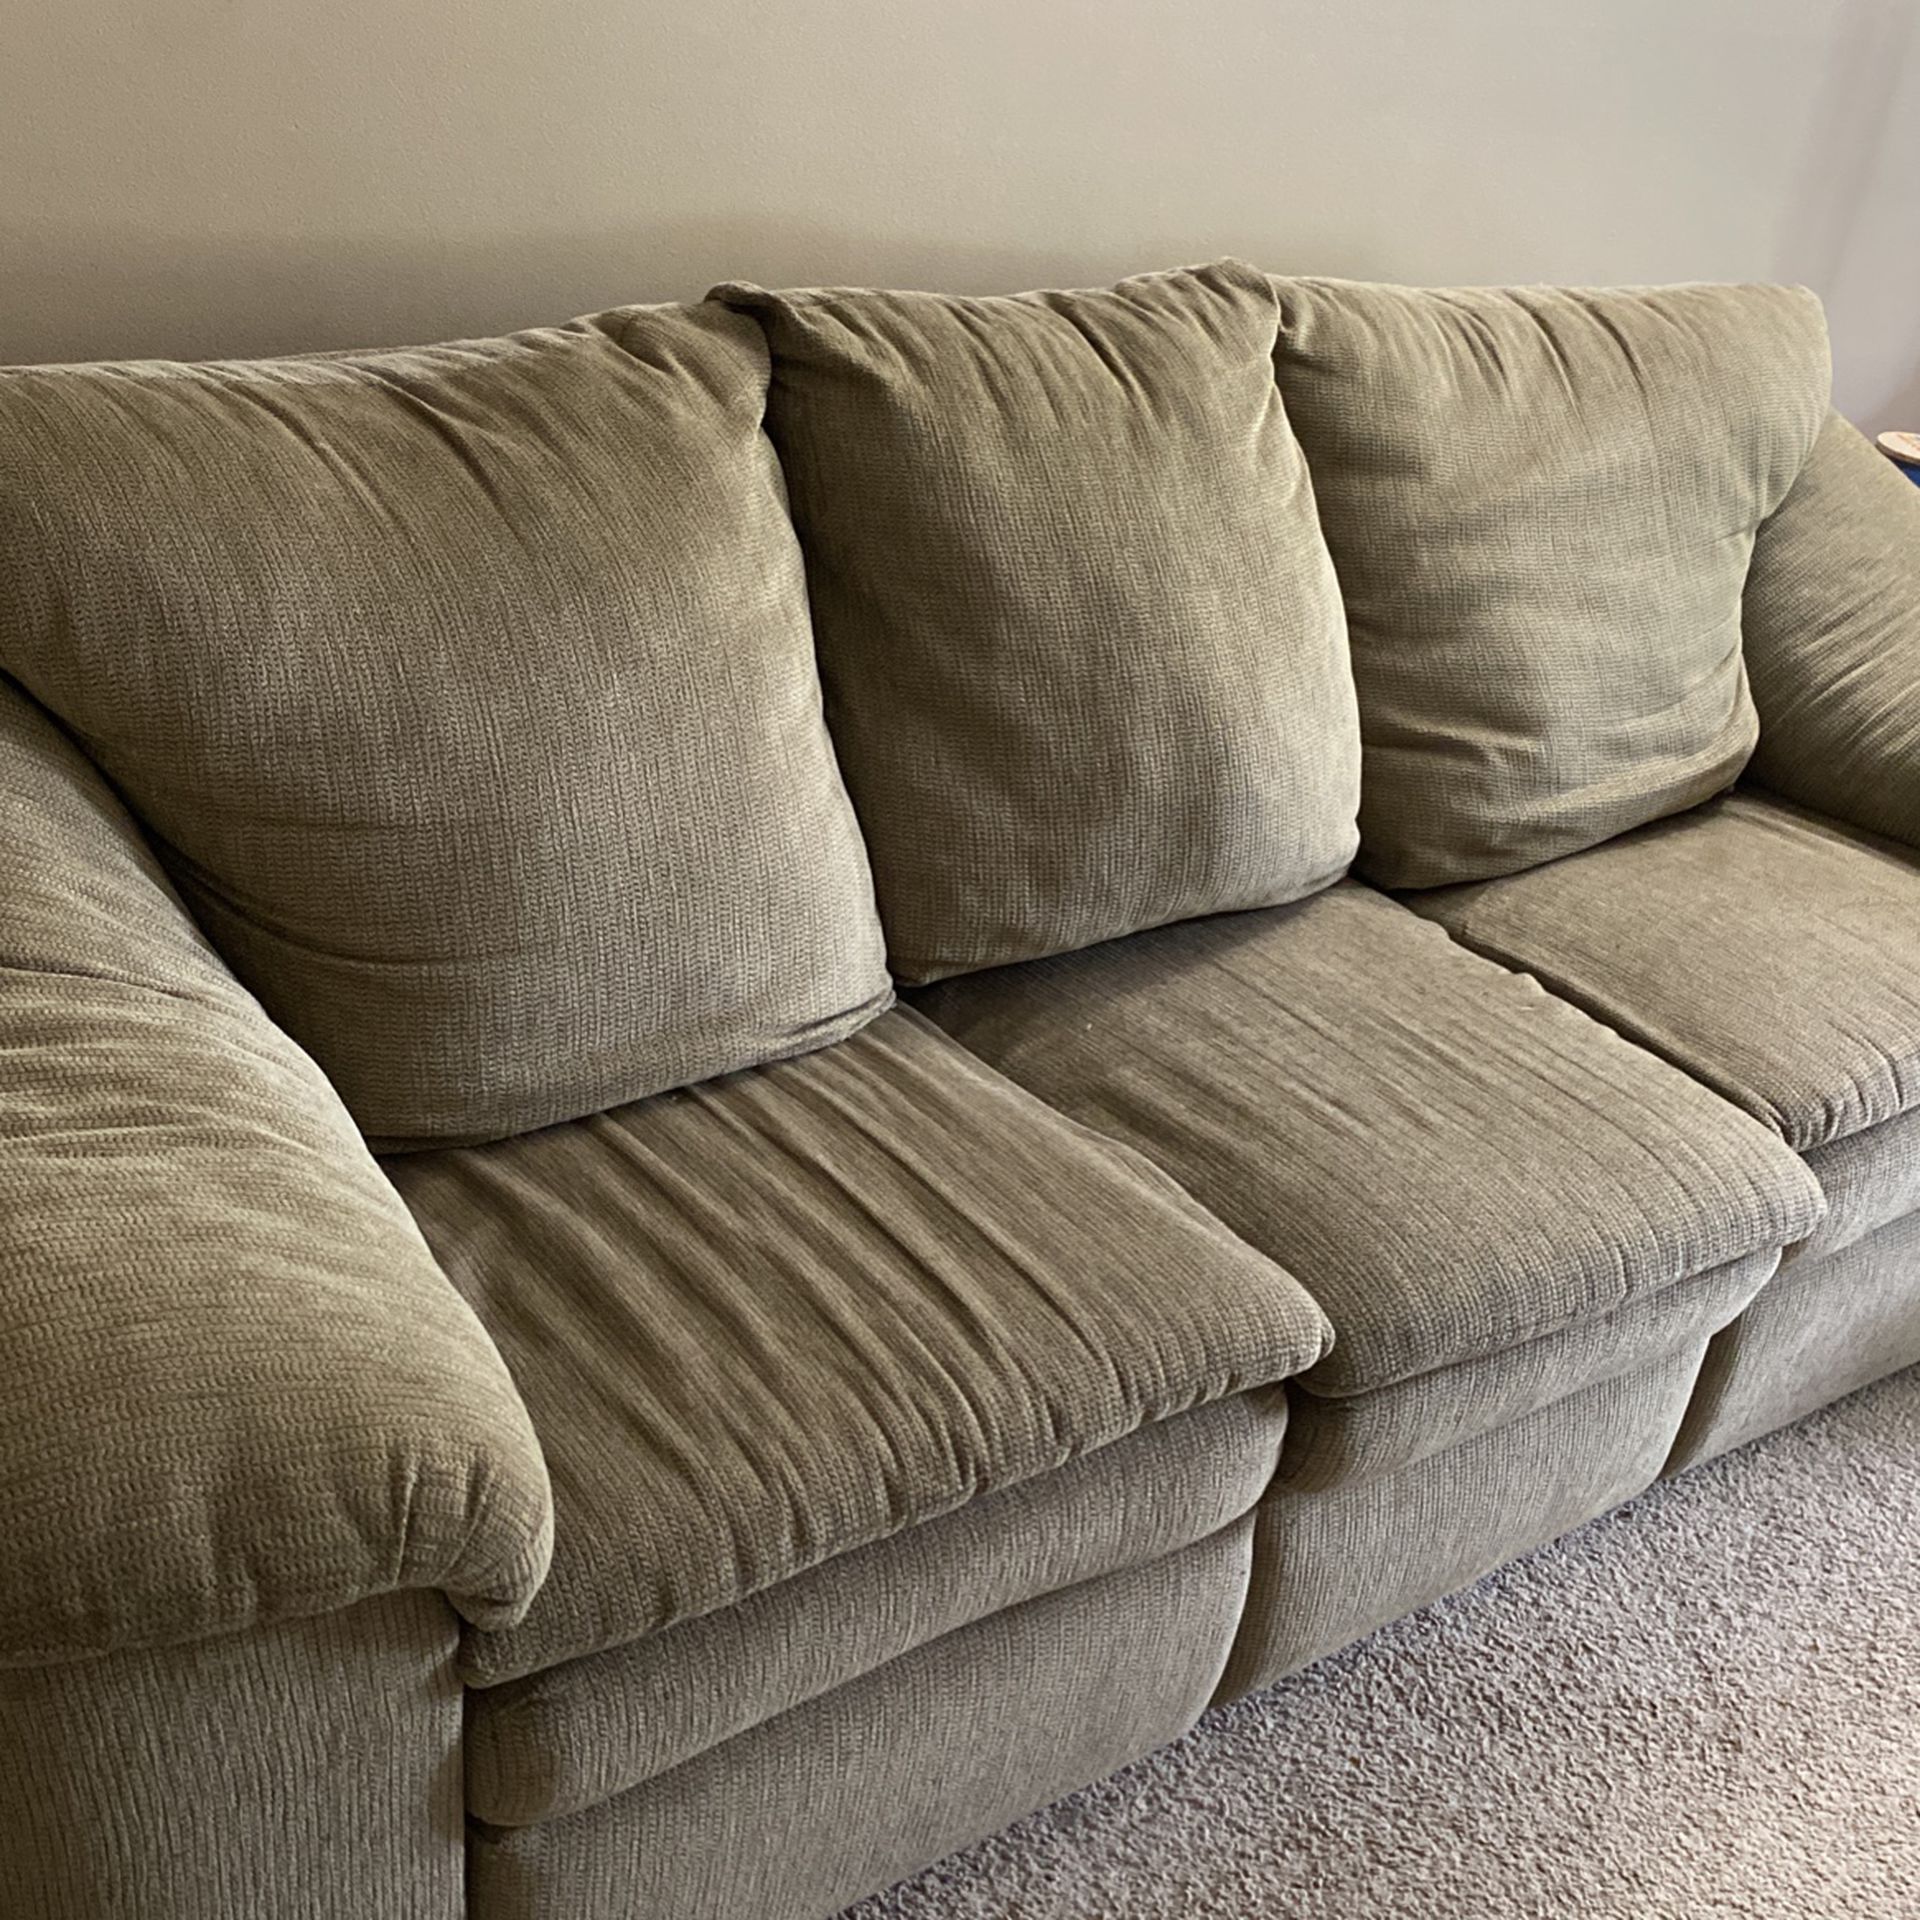 Tan Couch Free